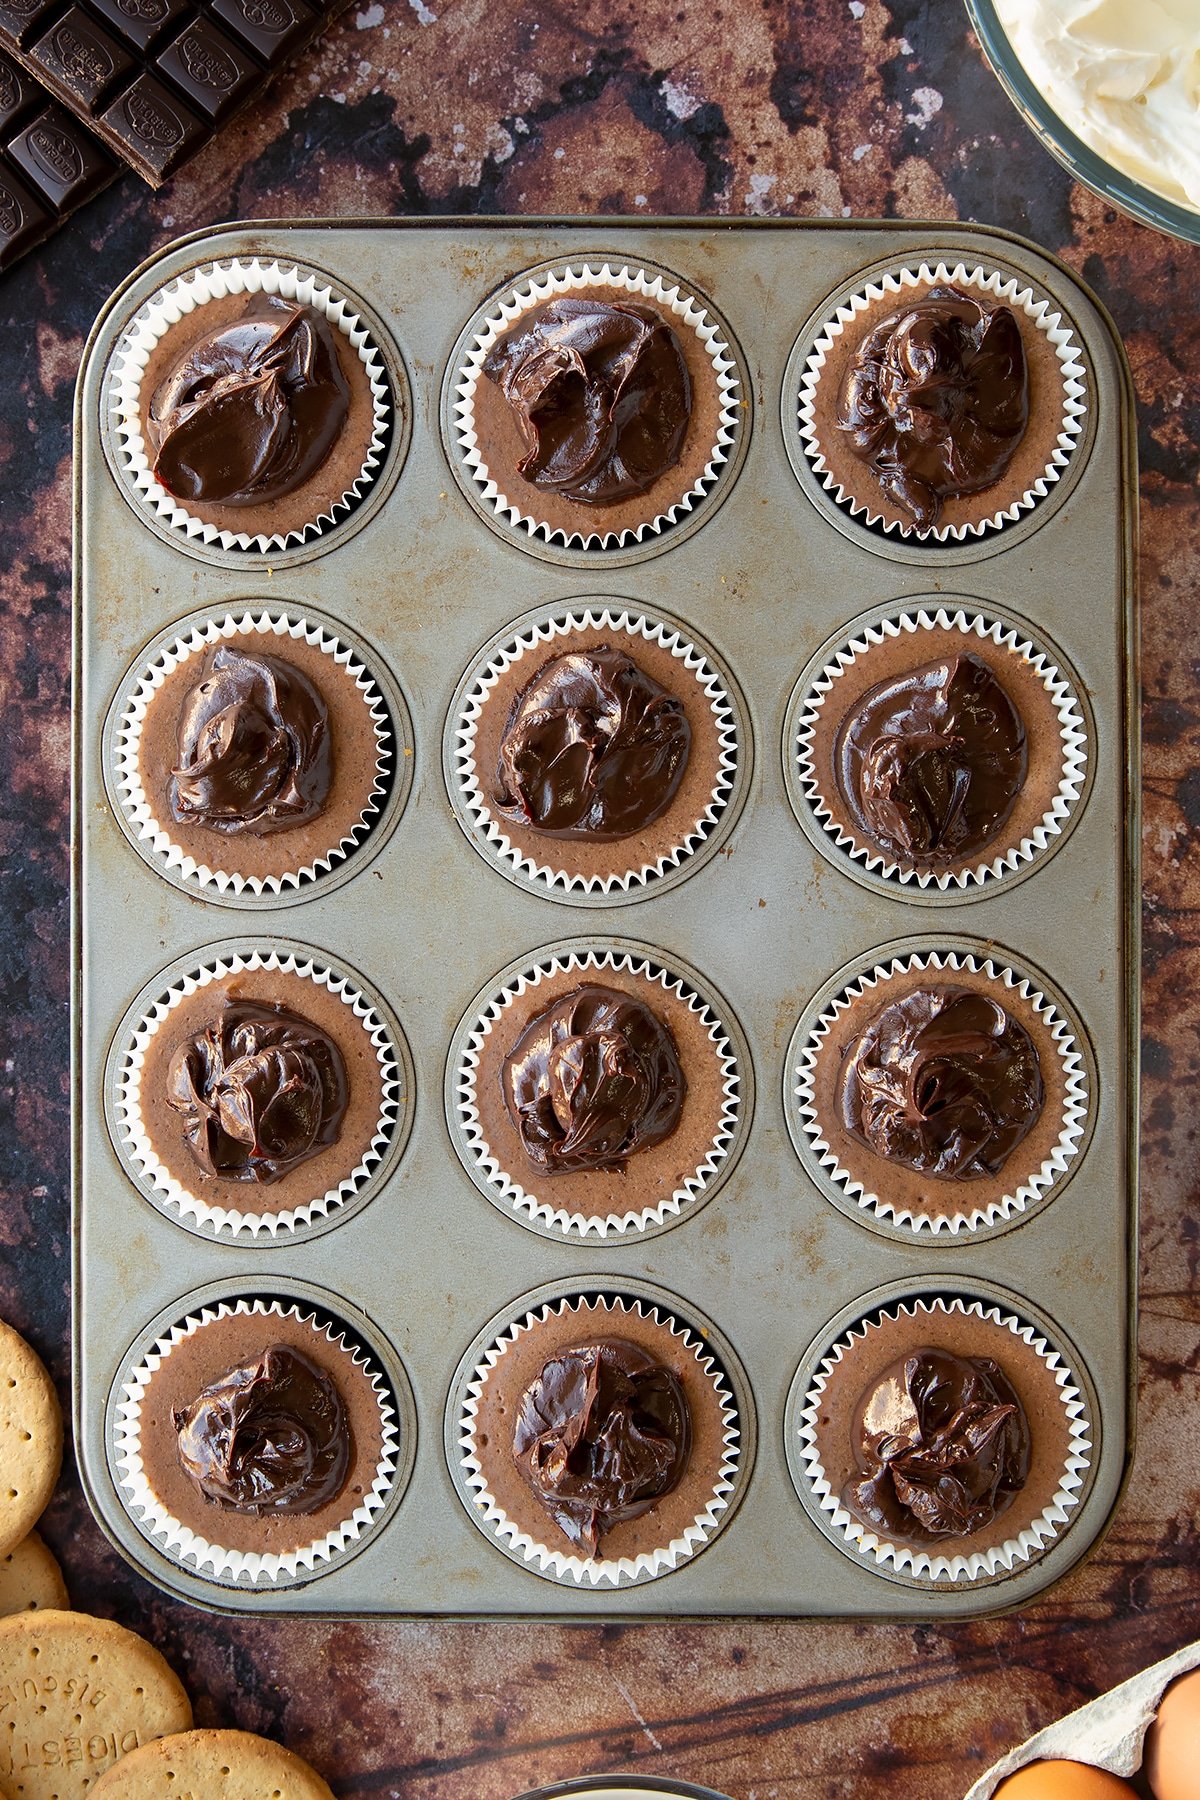 Chocolate cheesecake cupcakes, in a muffin tray. Each is topped with dollops of dark chocolate ganache.